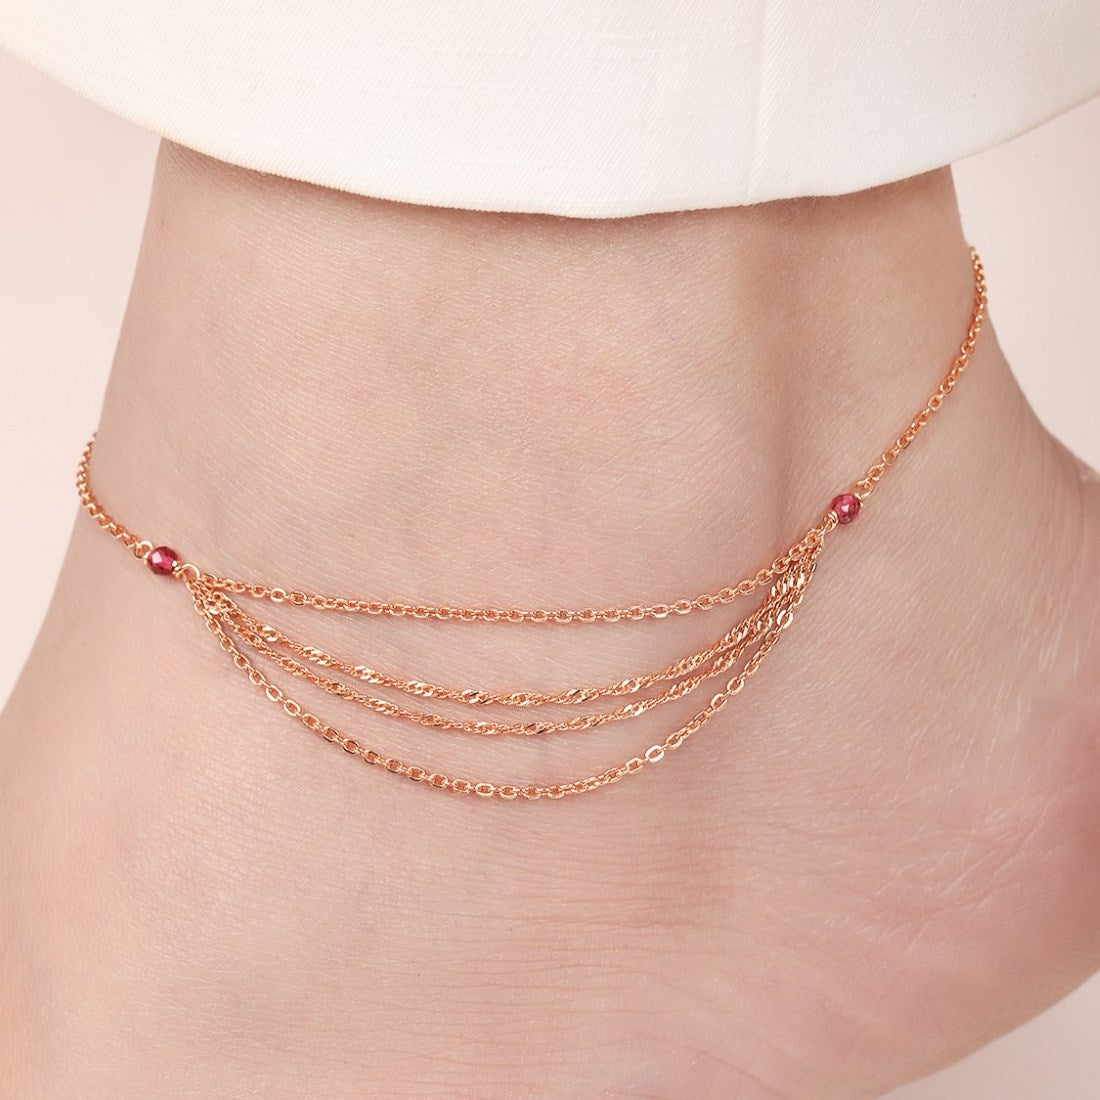 Chic Links Rose Gold-Plated 925 Sterling Silver Anklet